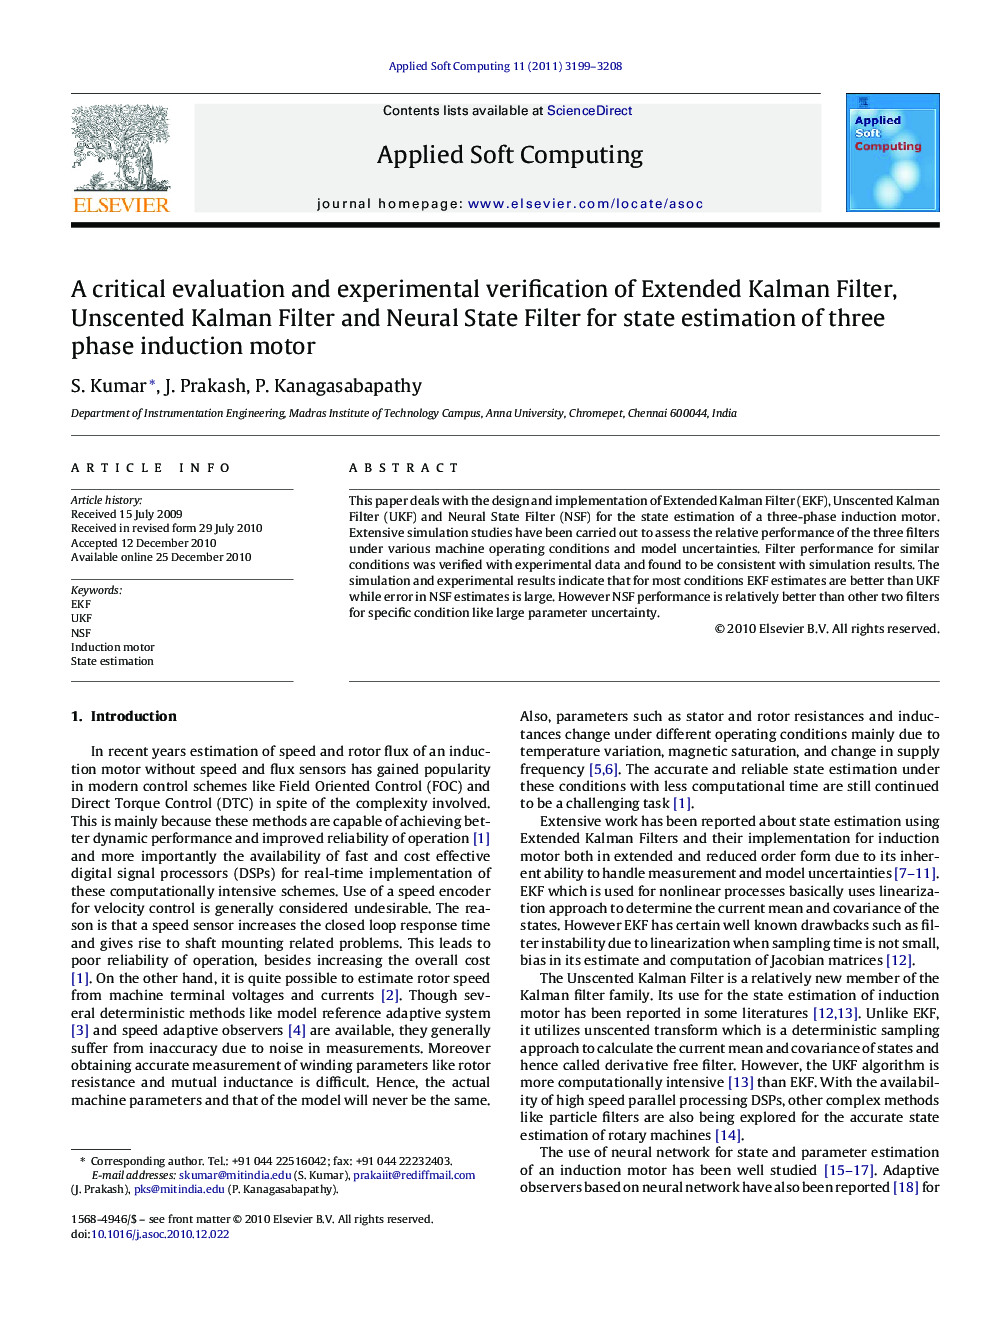 A critical evaluation and experimental verification of Extended Kalman Filter, Unscented Kalman Filter and Neural State Filter for state estimation of three phase induction motor